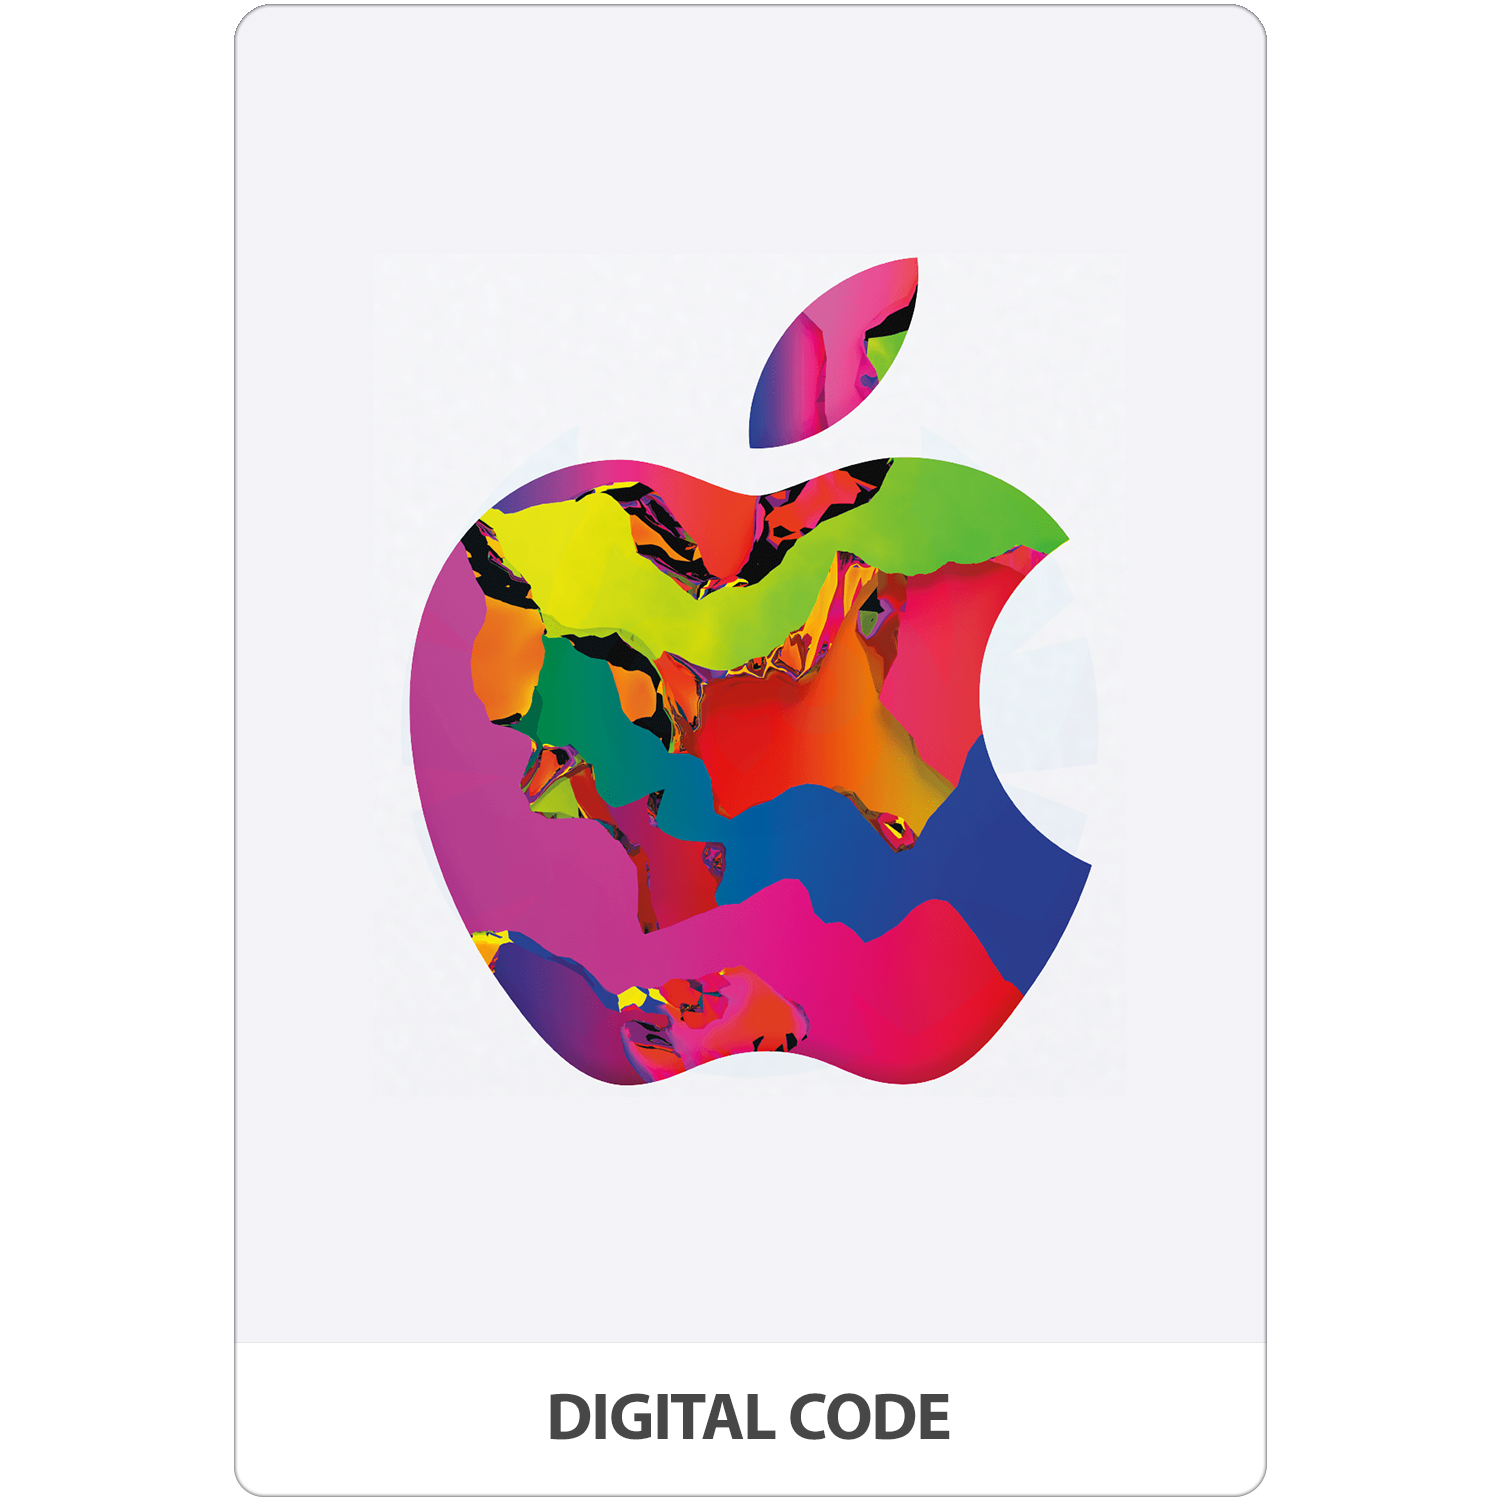 TW] Taiwan Apple Itunes Gift Card Code TWD [Instant Delivery] 台湾苹果礼品卡,  Tickets & Vouchers, Store Credits on Carousell